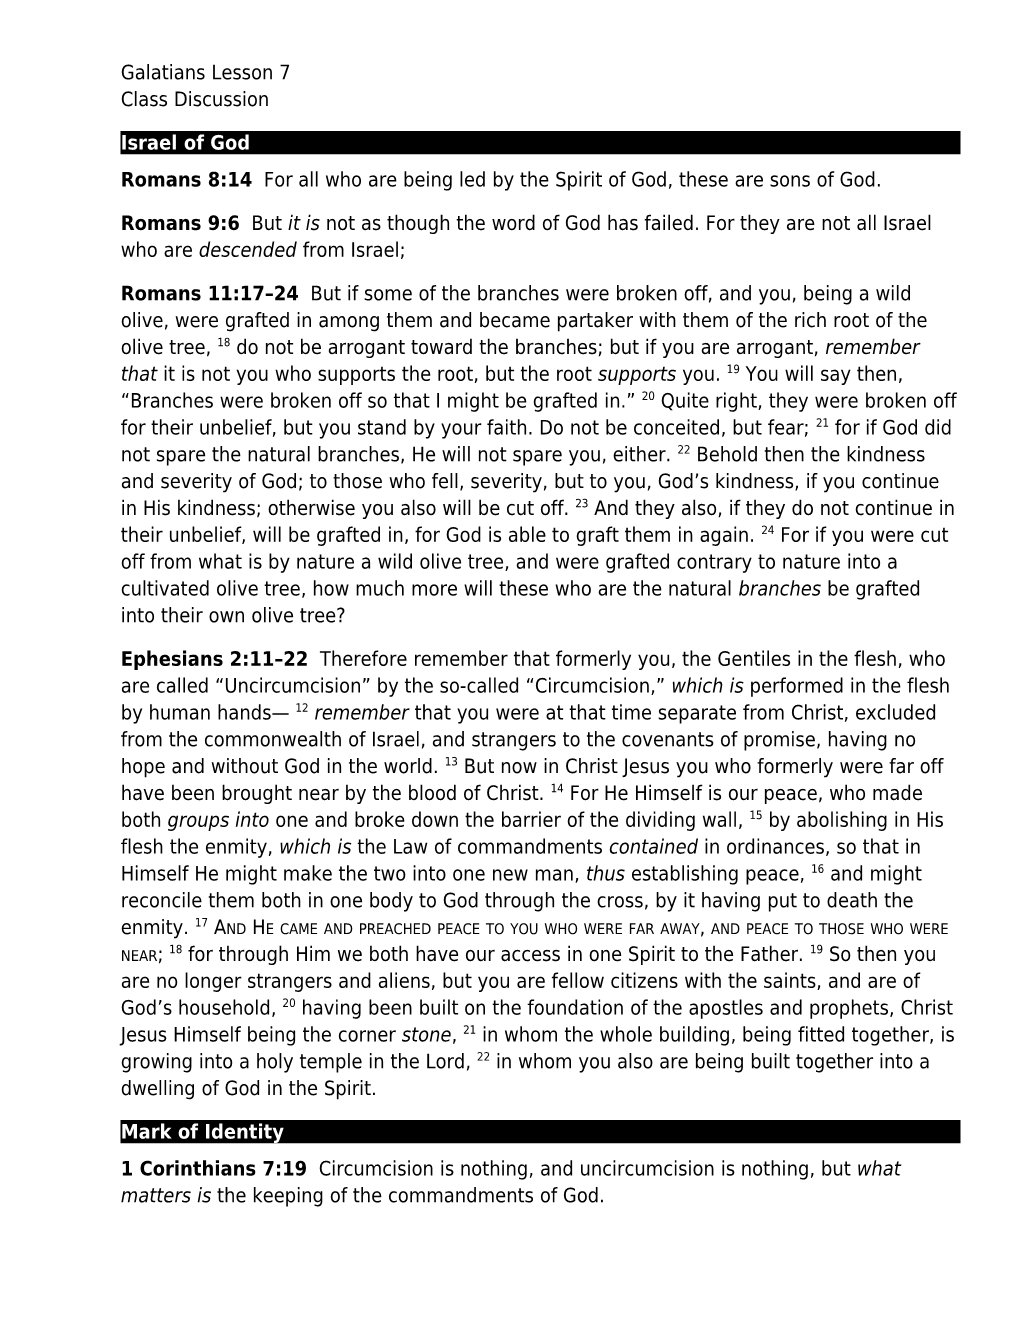 Galatians Lesson 7 Class Discussion